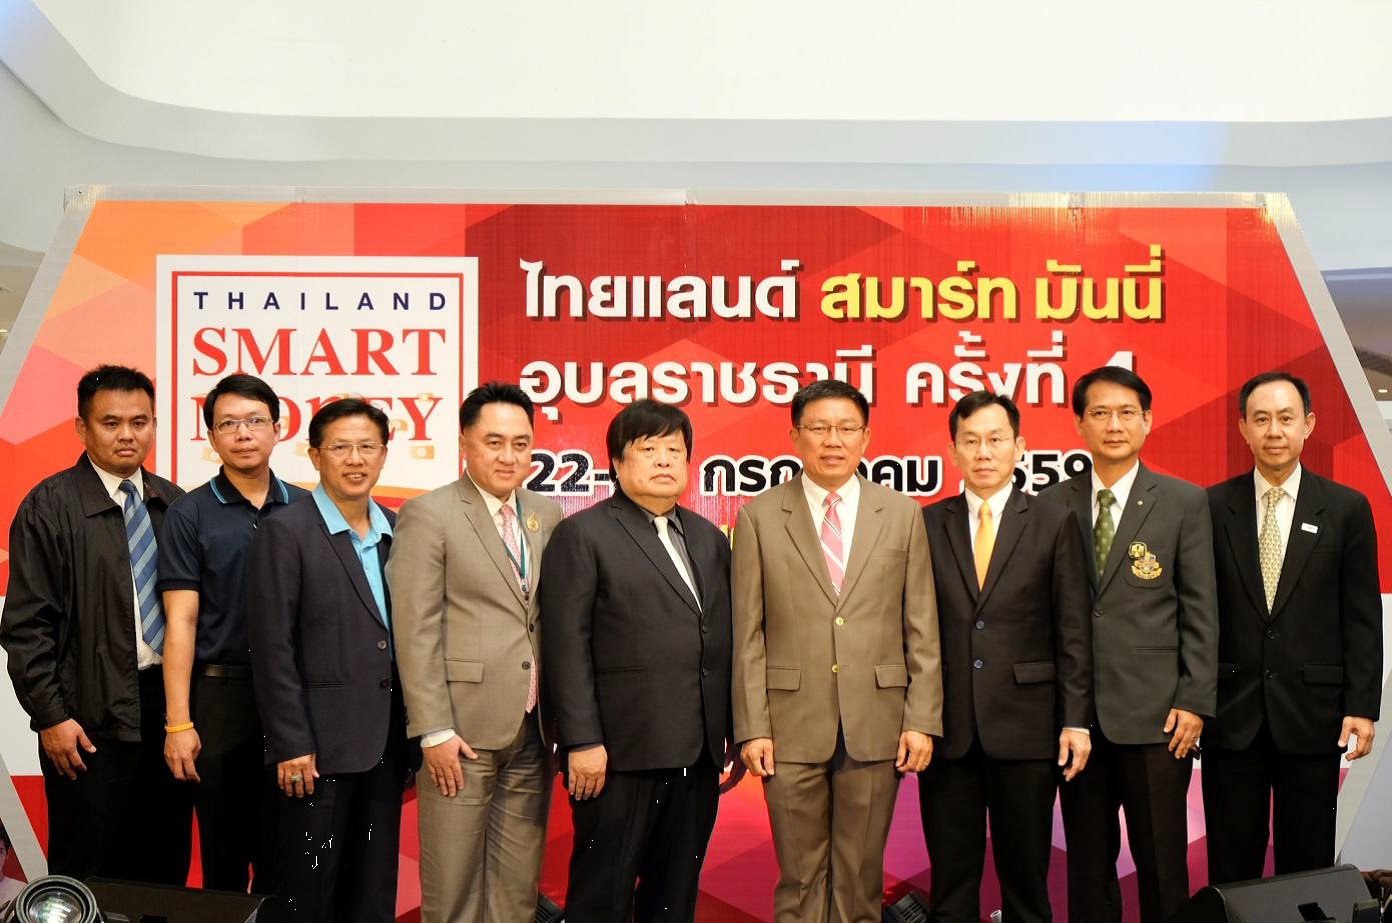 EXIM Thailand Opens Booth at Thailand Smart Money in Ubon Ratchathani